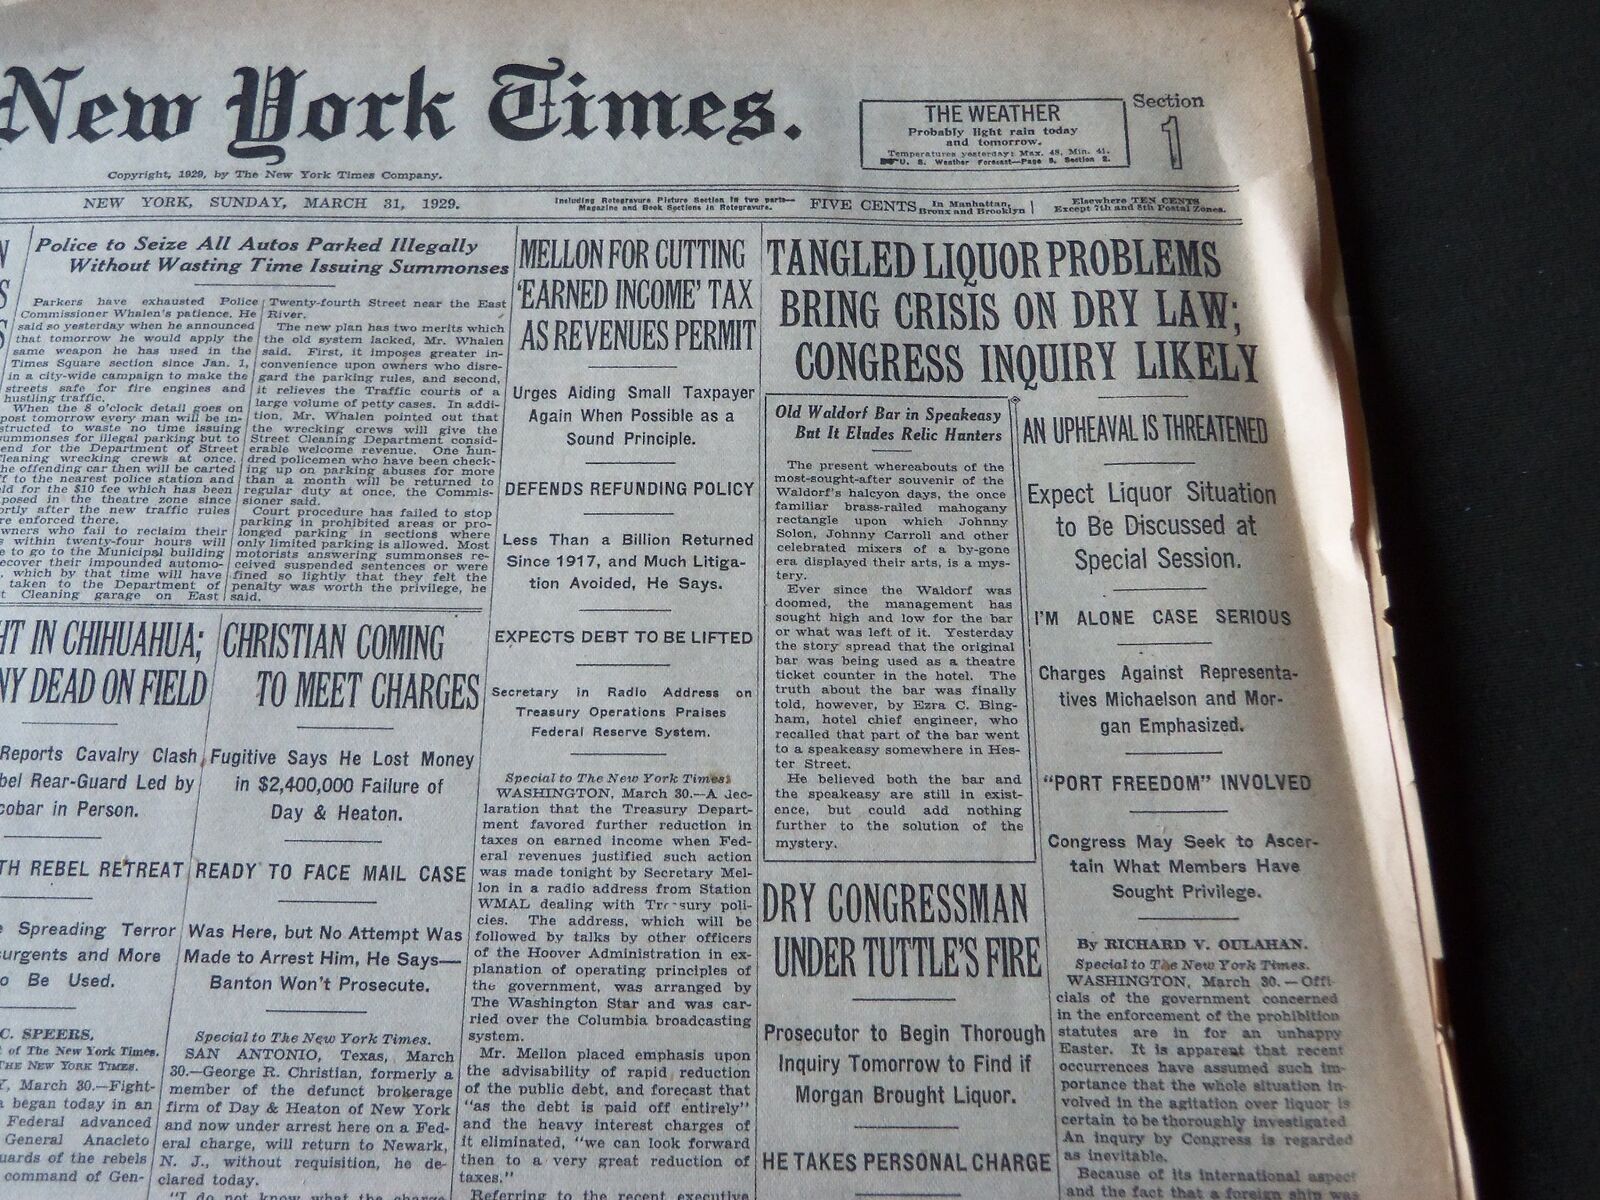 1929 MARCH 31 NEW YORK TIMES - TANGLED LIQUOR PROBLEMS BRING CRISIS - NT 7181